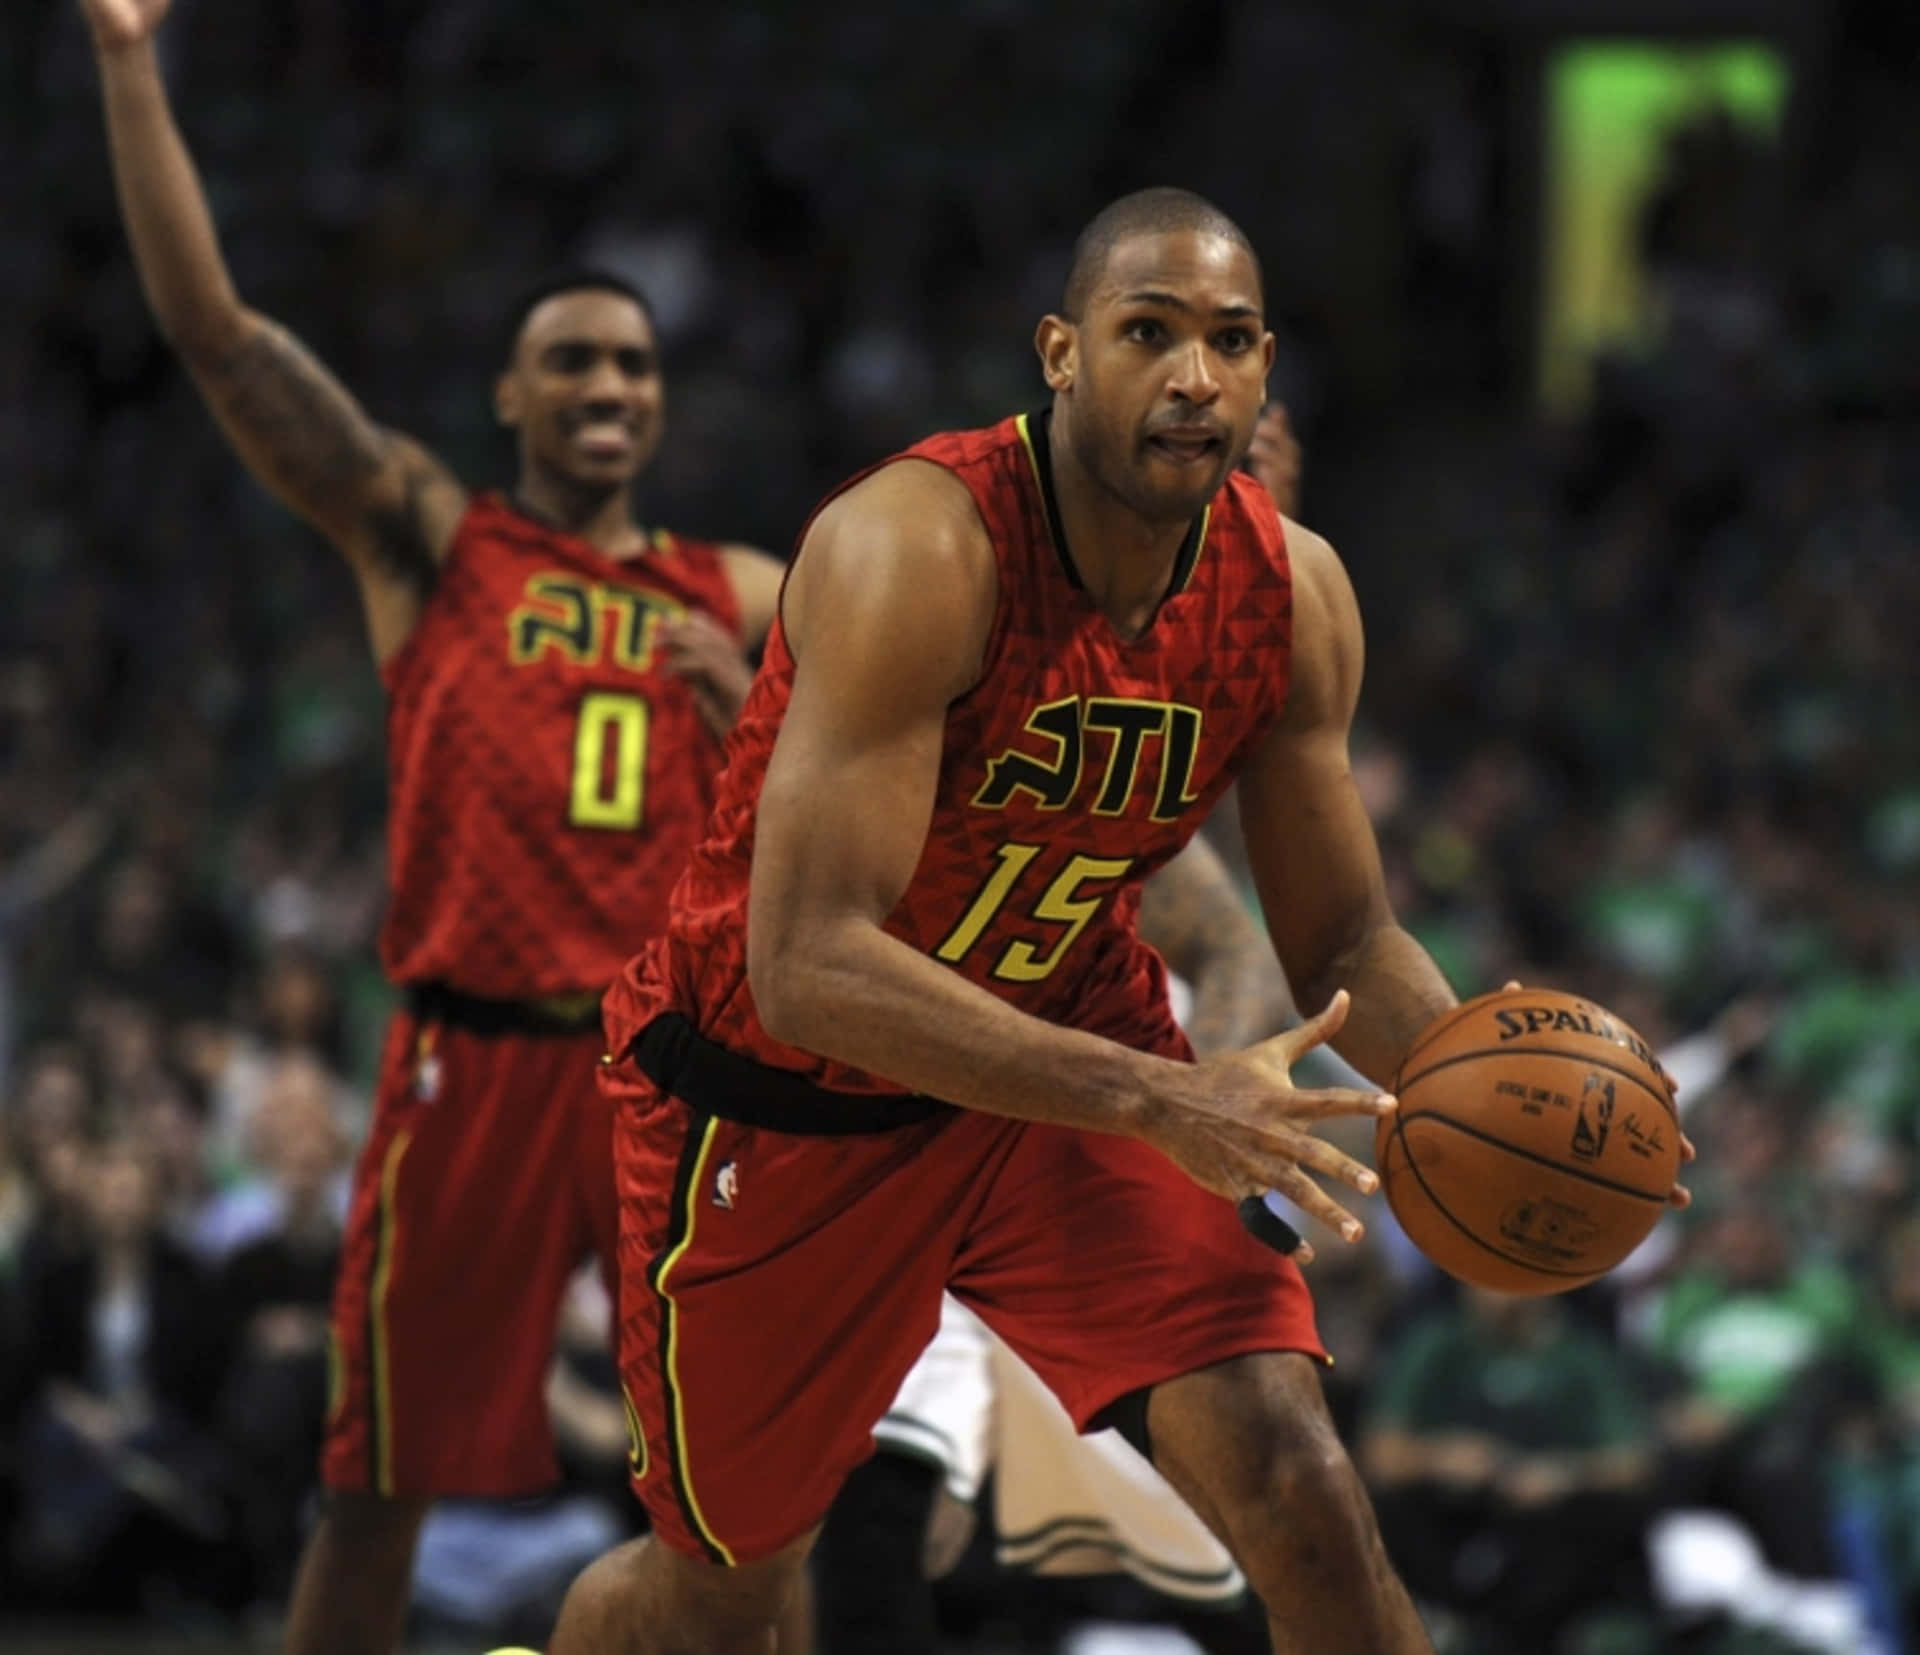 Al Horford of the Philadelphia 76ers leads his team on the court